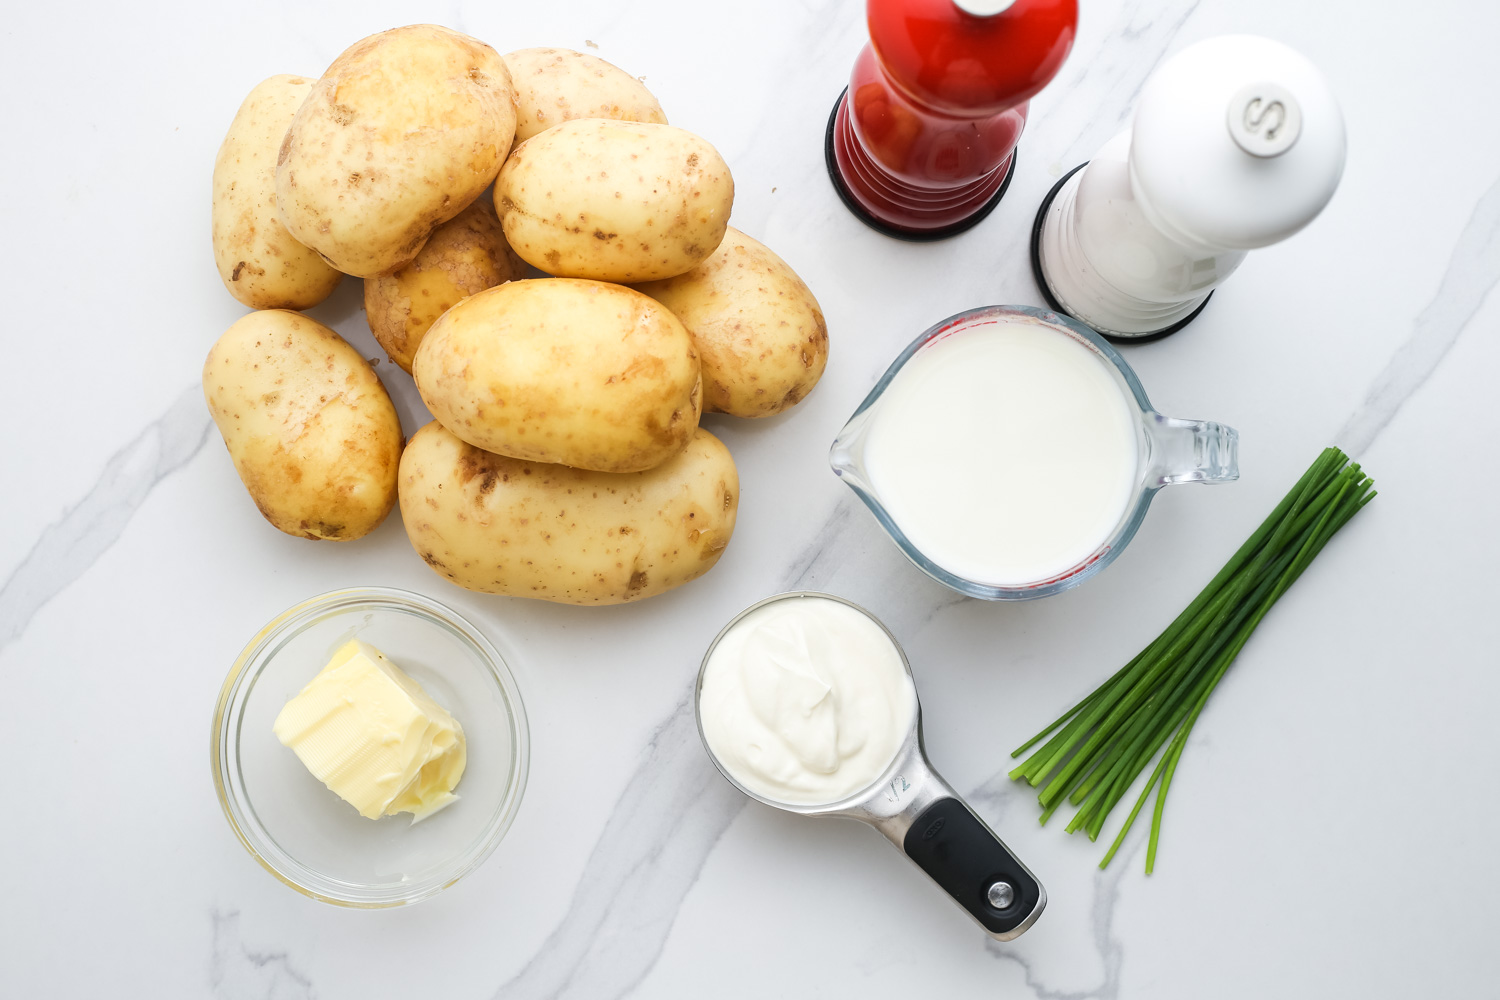 Ingredients needed to make sour cream mashed potatoes